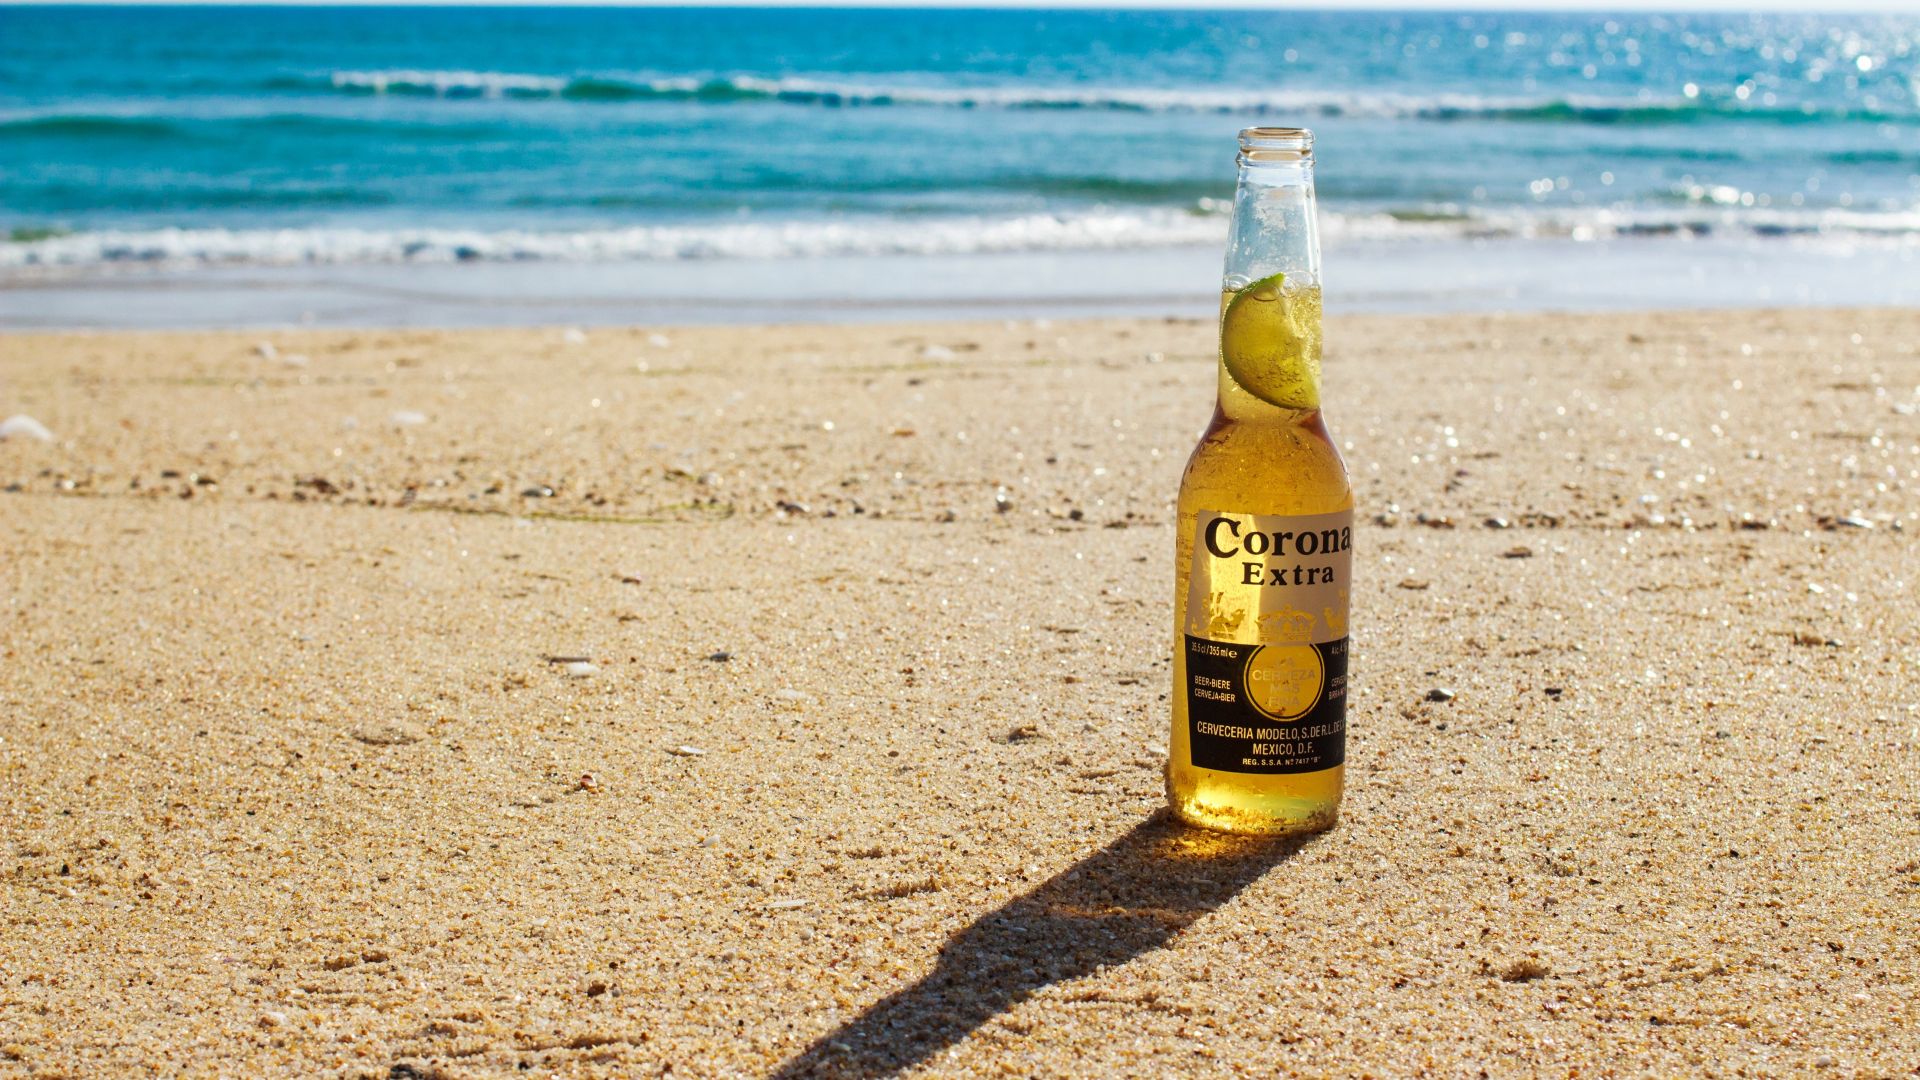 Desktop Wallpaper Corona Extra Beer Bottle At Beach, Hd Image, Picture,  Background, 4f1vcu